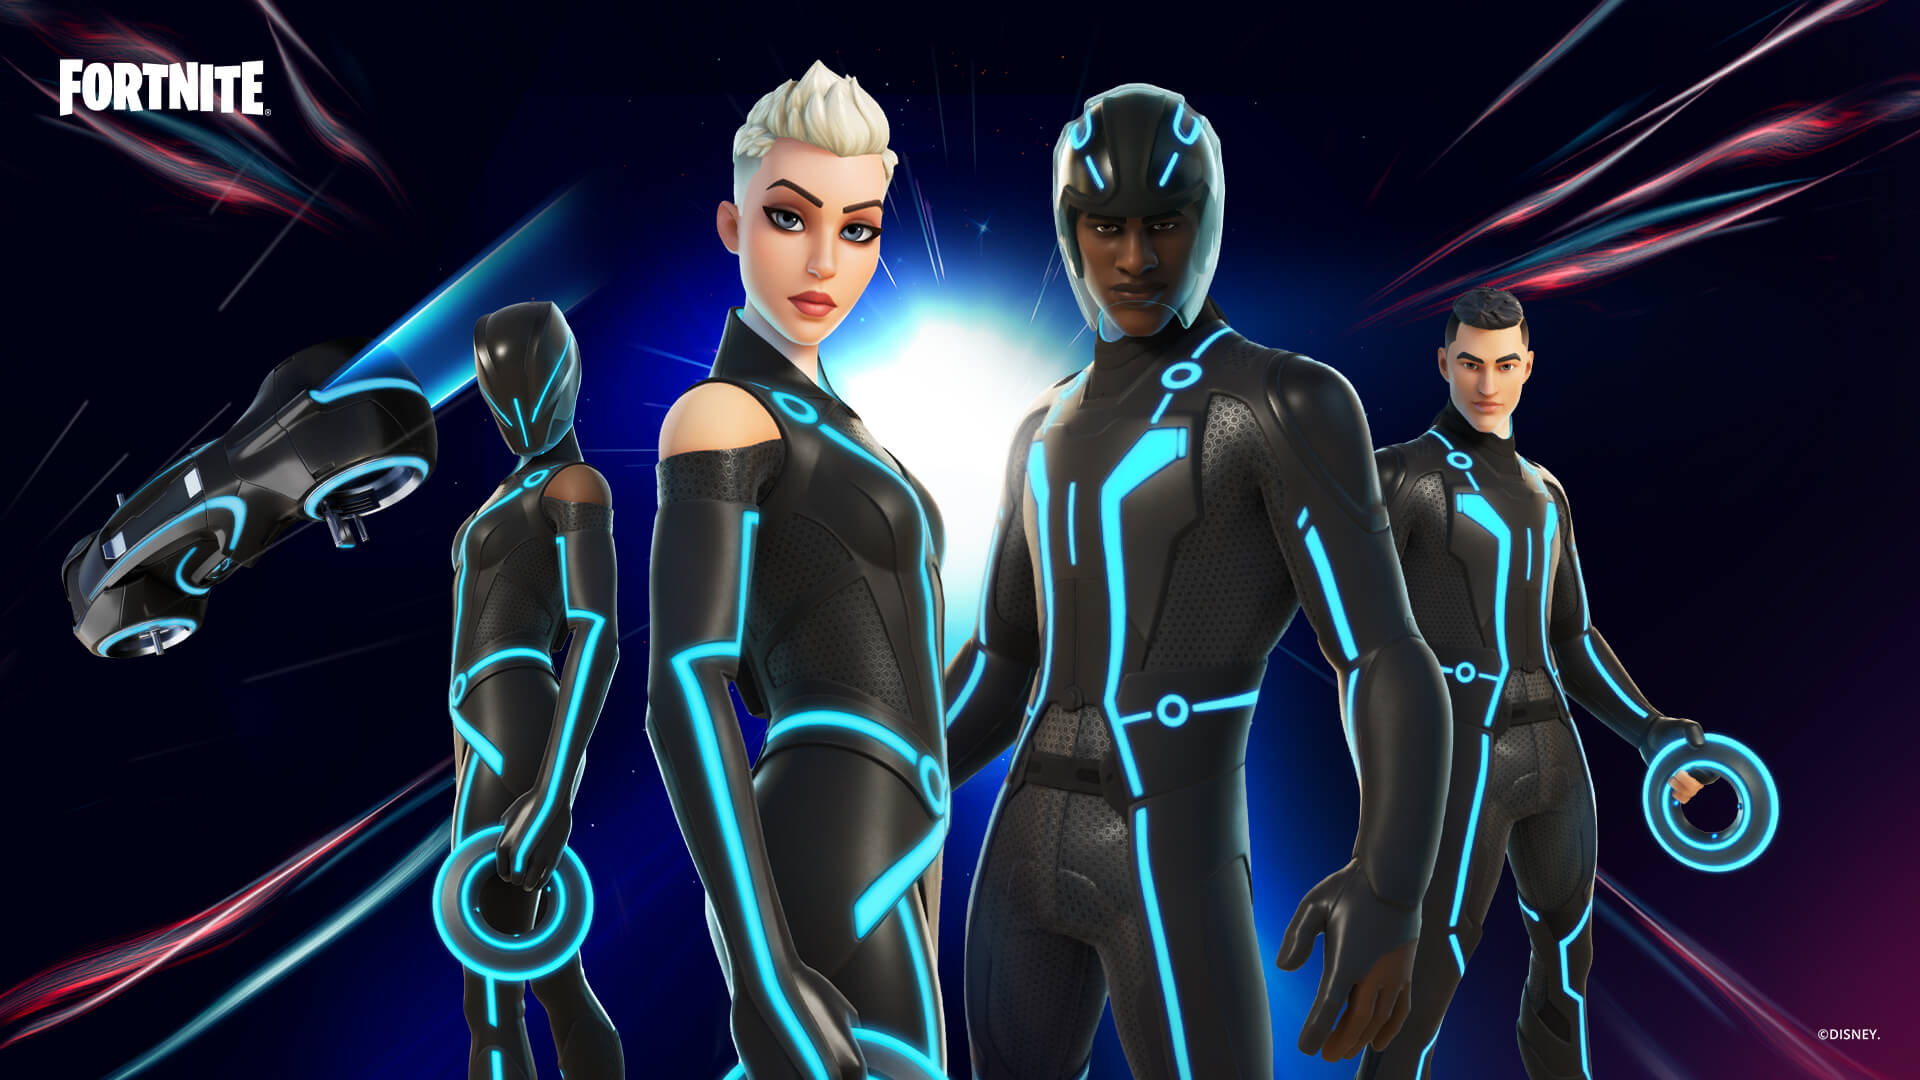 Fortnite Officially Gets Tron Crossover